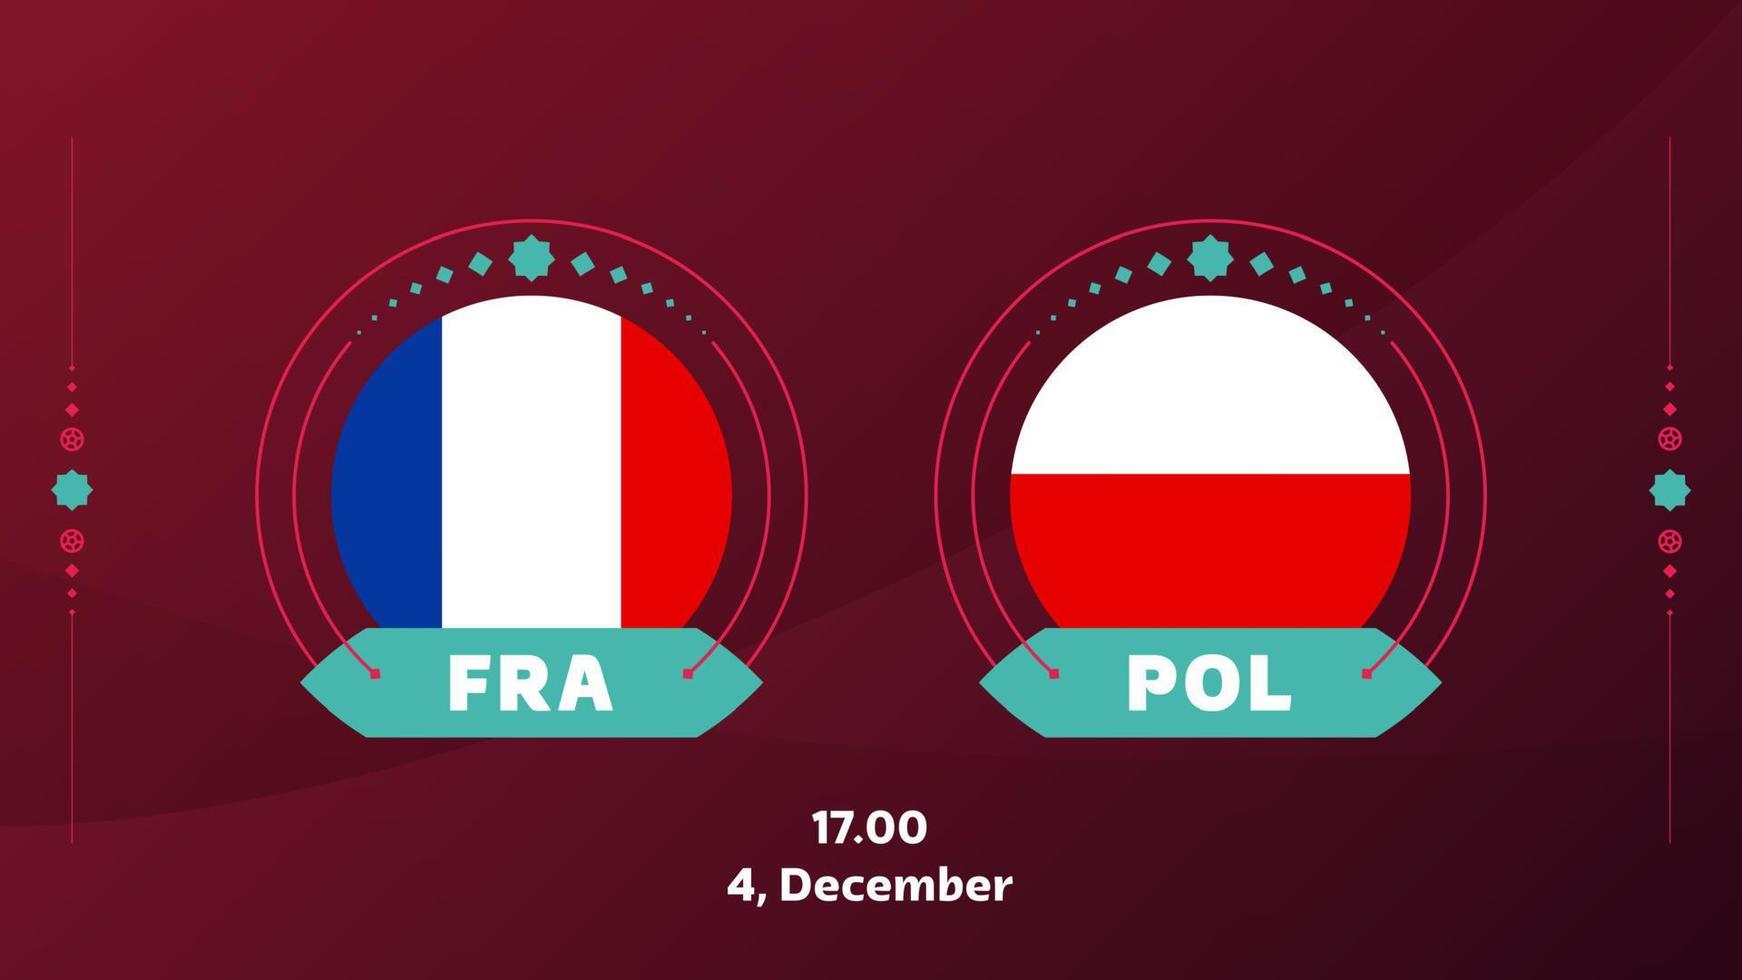 france poland playoff round of 16 match Football 2022. 2022 World Football championship match versus teams intro sport background, championship competition poster, vector illustration